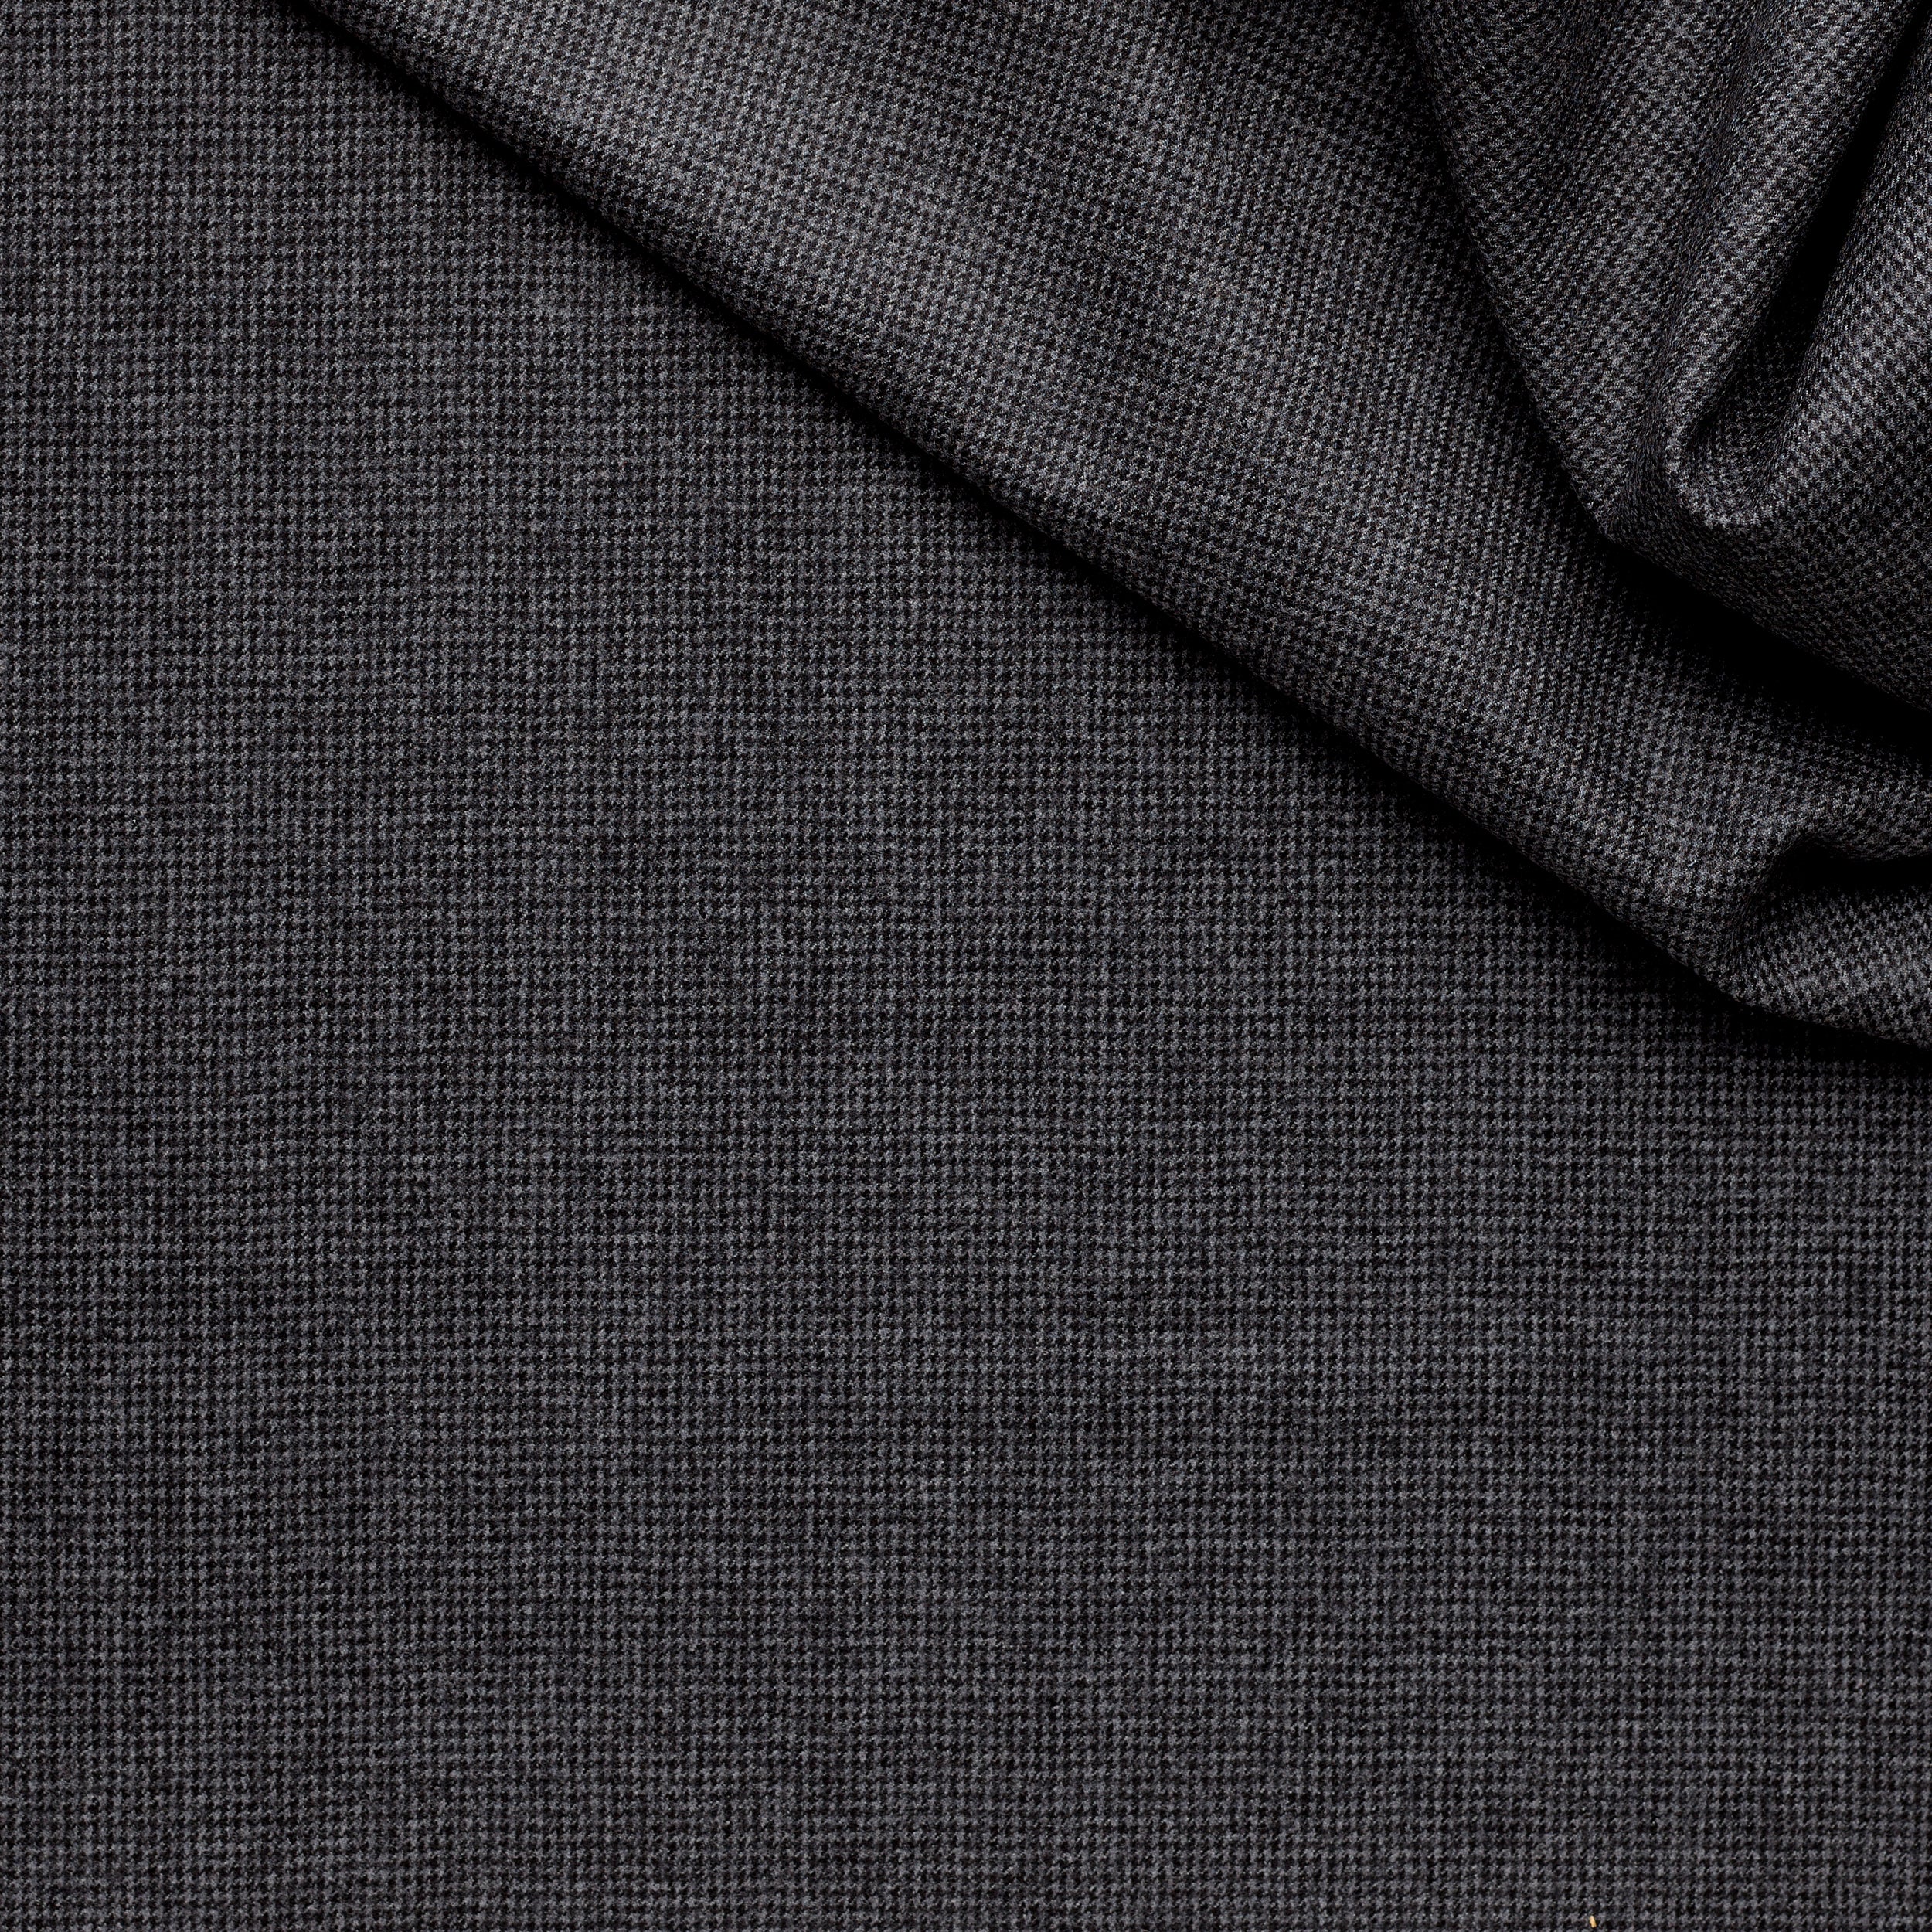 WF2-22 : Worsted Flannel Charcoal Houndstooth